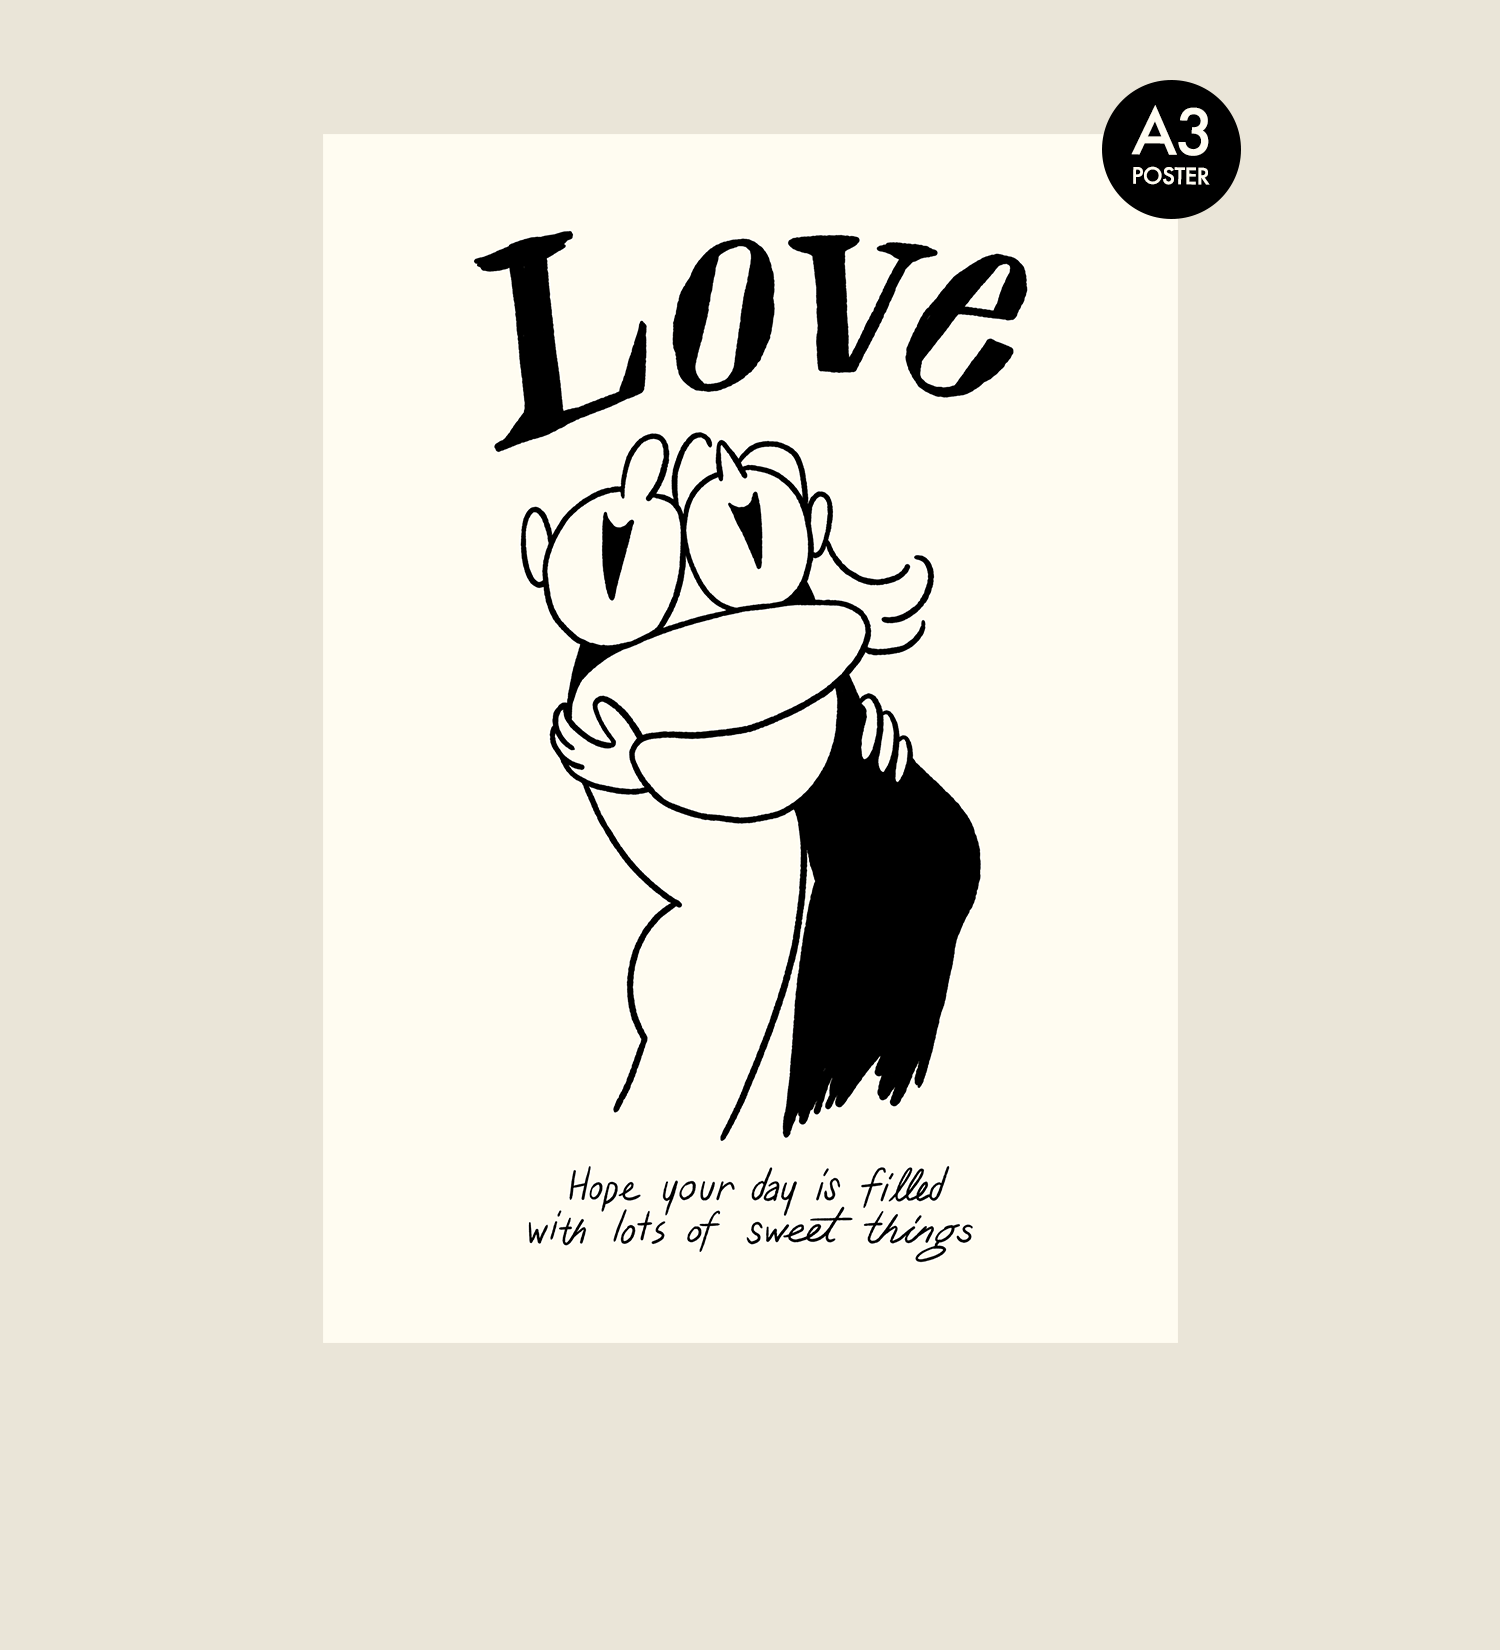 [A3 POSTER] LOVE